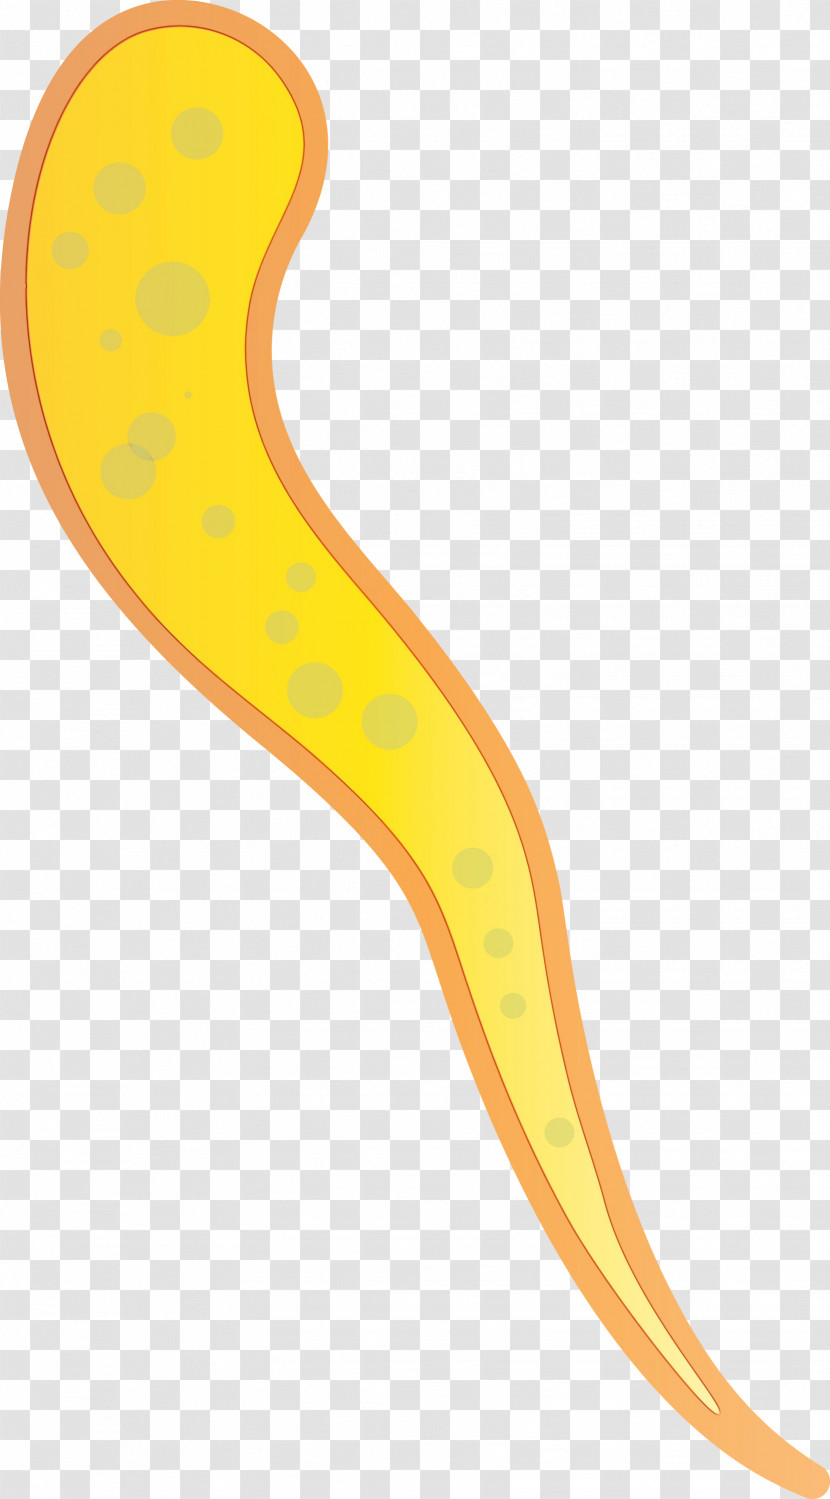 Yellow Flatworm Transparent PNG